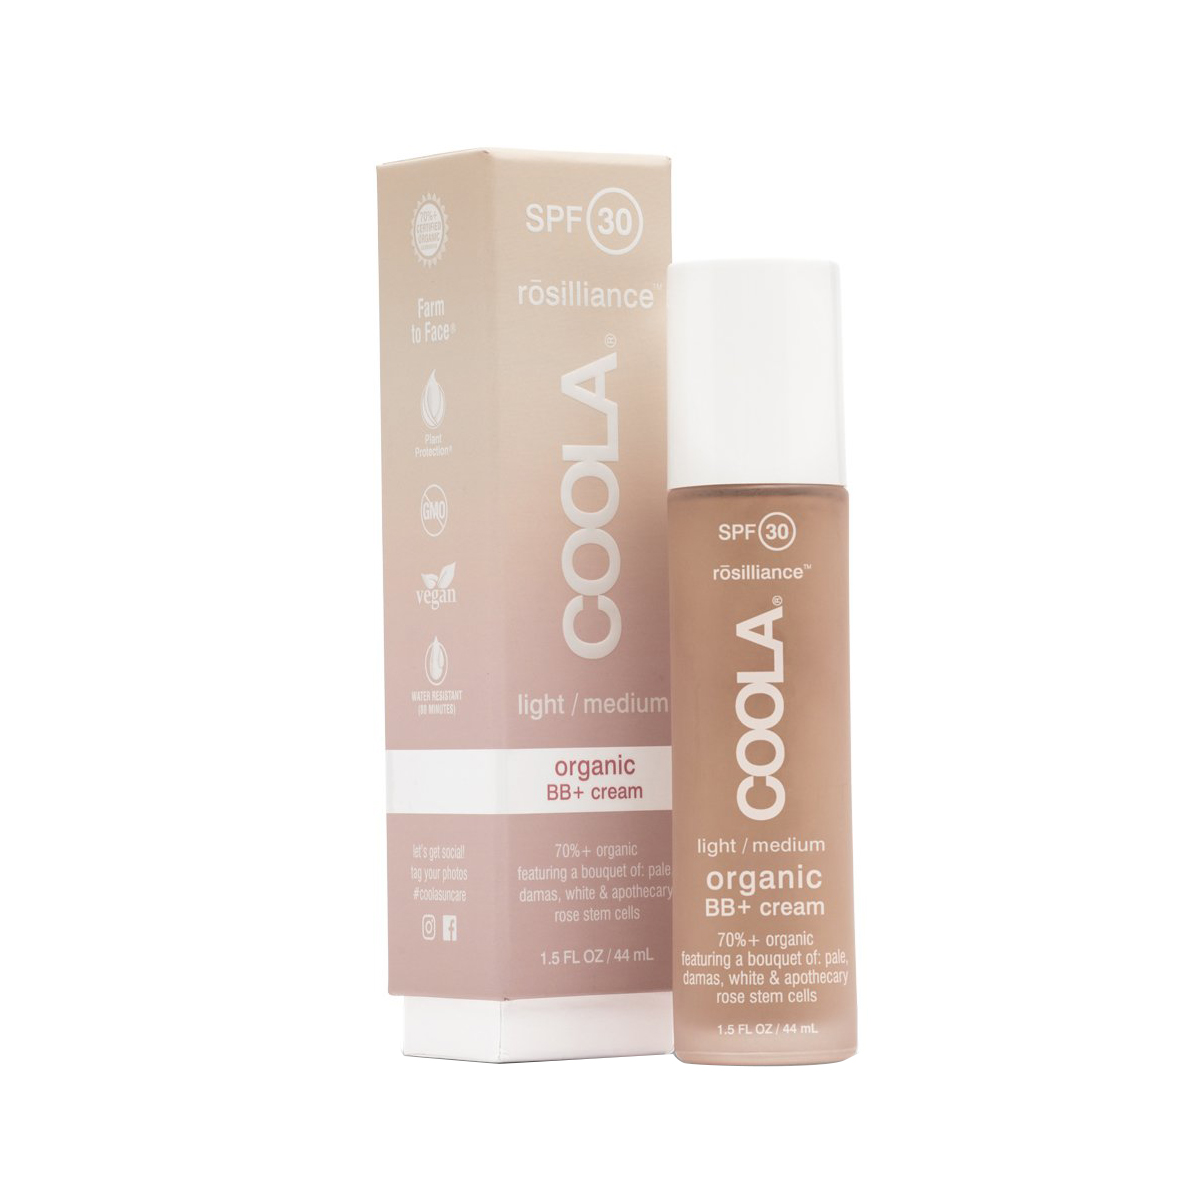 Clean Beauty Products for Mature Skin: Coola Mineral Face SPF 30 Rōsilliance BB+ Cream